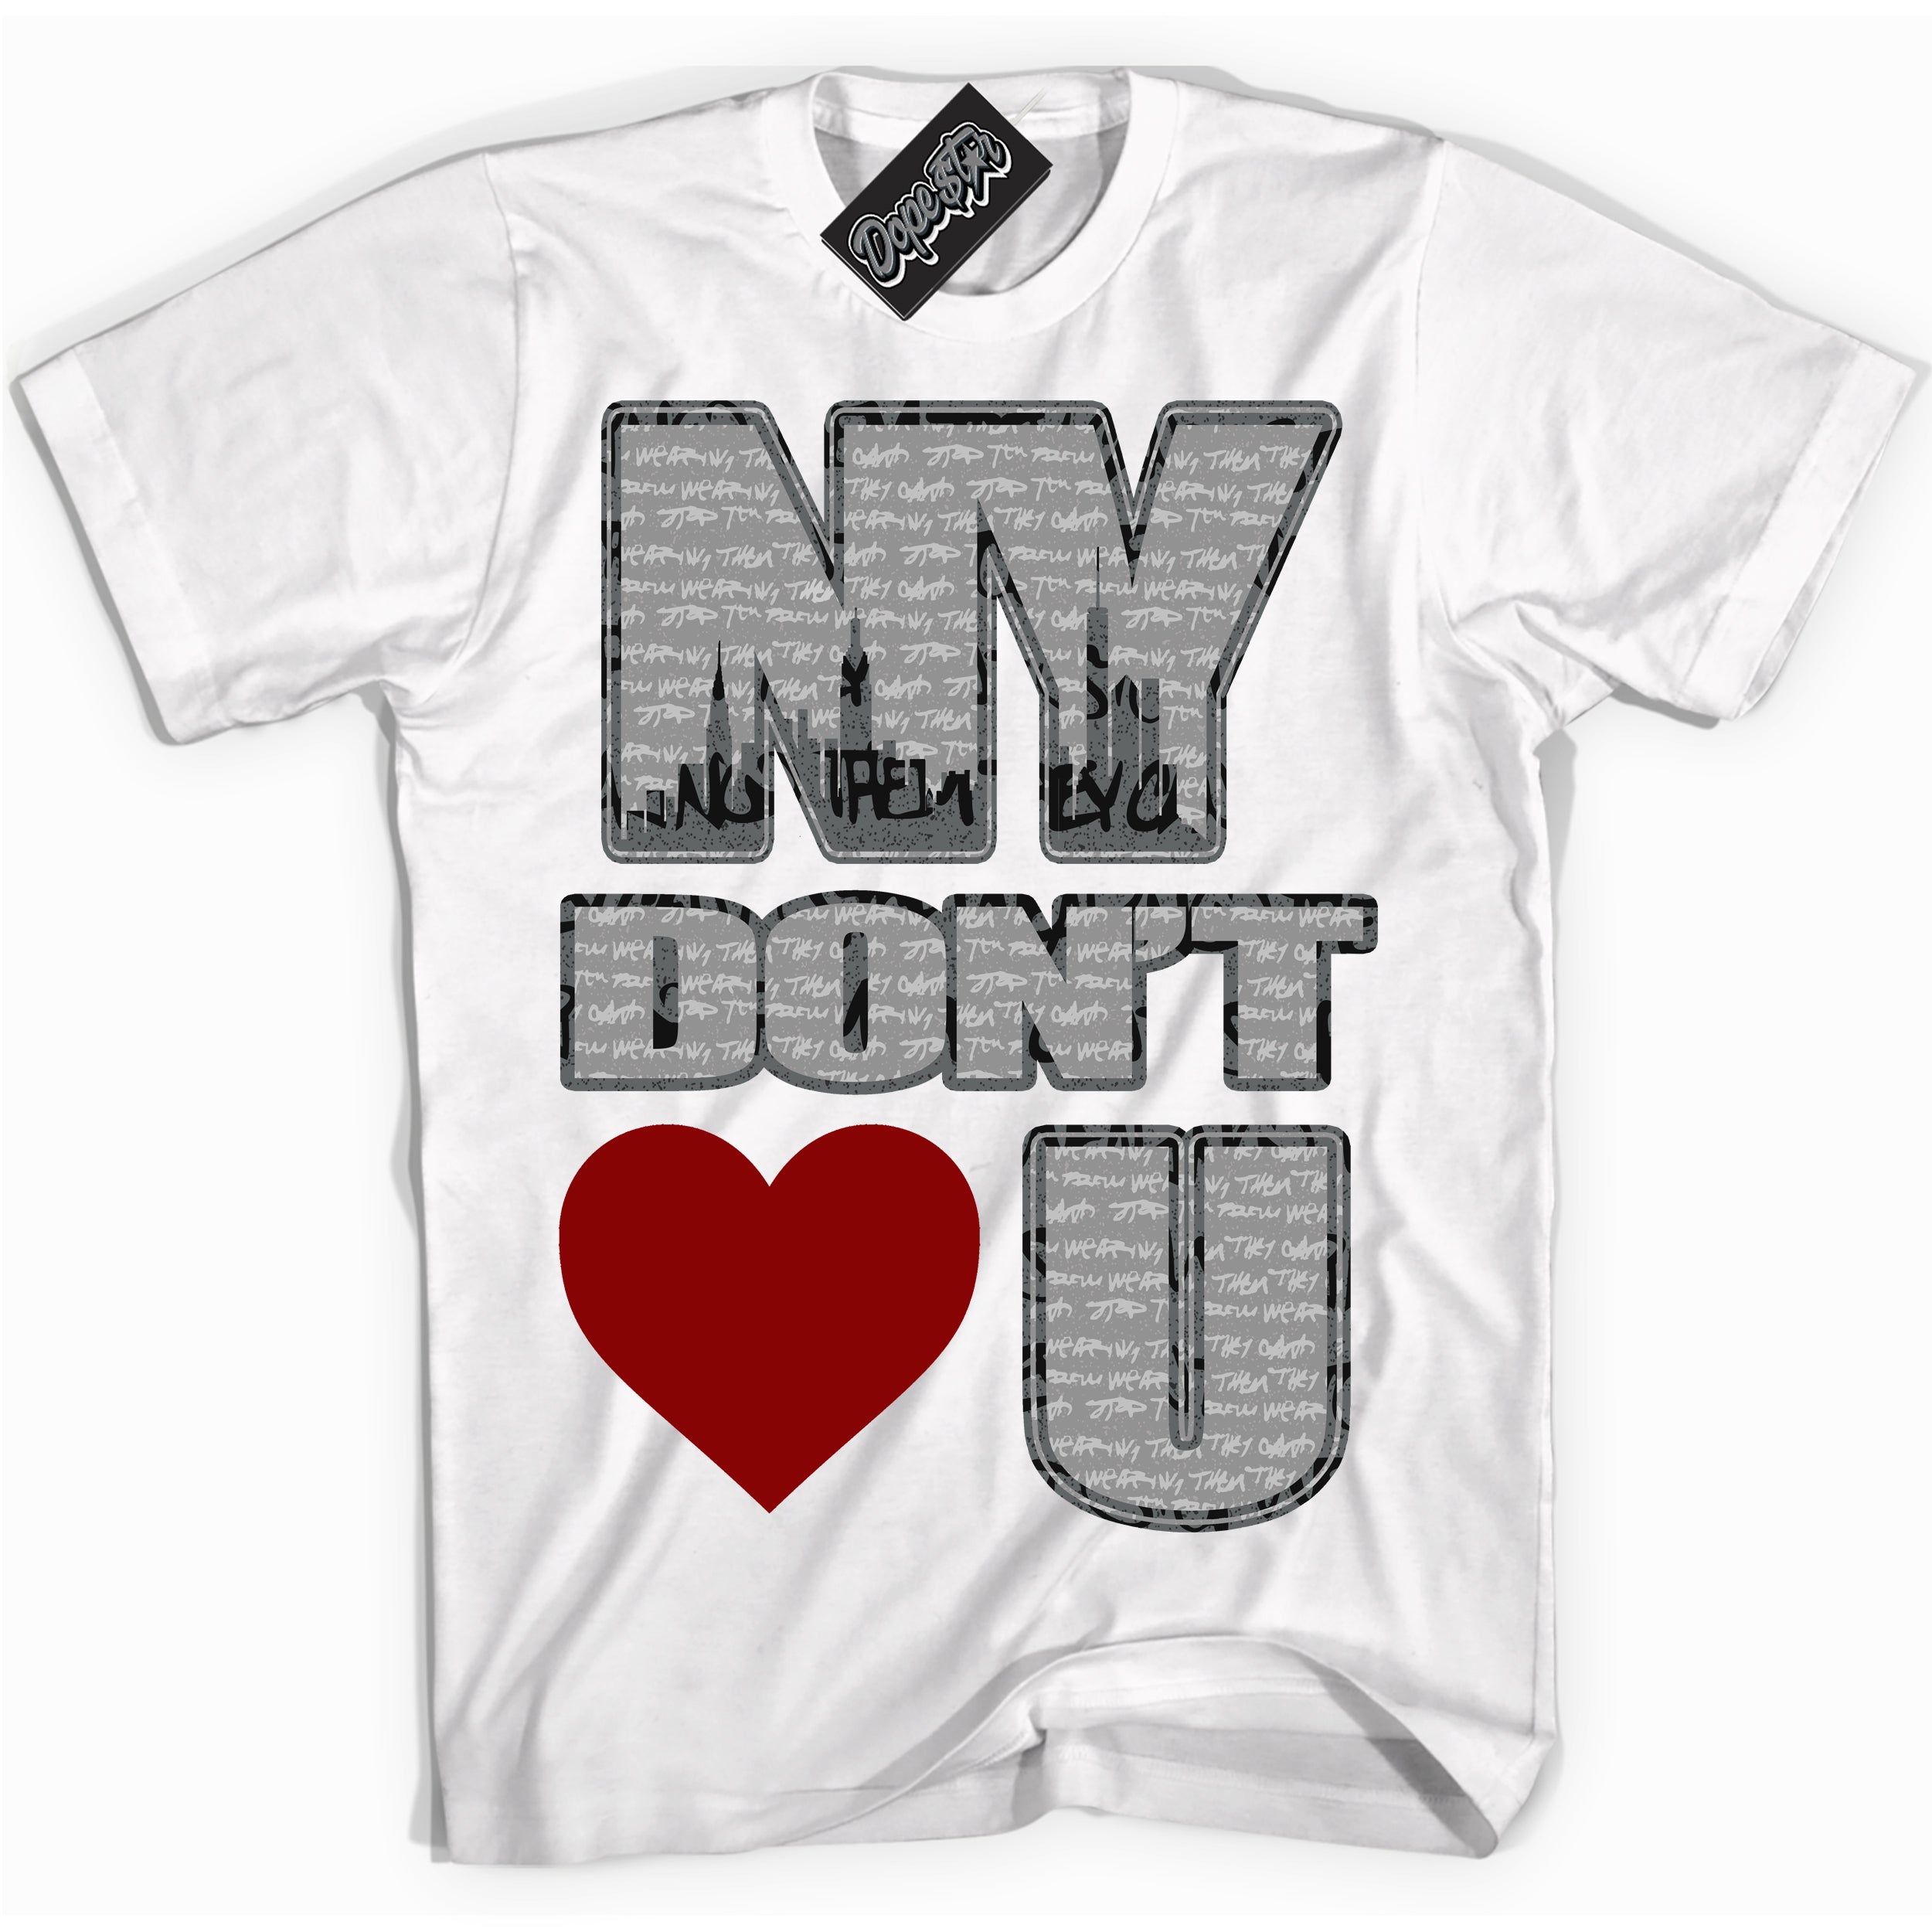 Cool White Shirt with “ NY Don't Love You ” design that perfectly matches Rebellionaire 1s Sneakers.